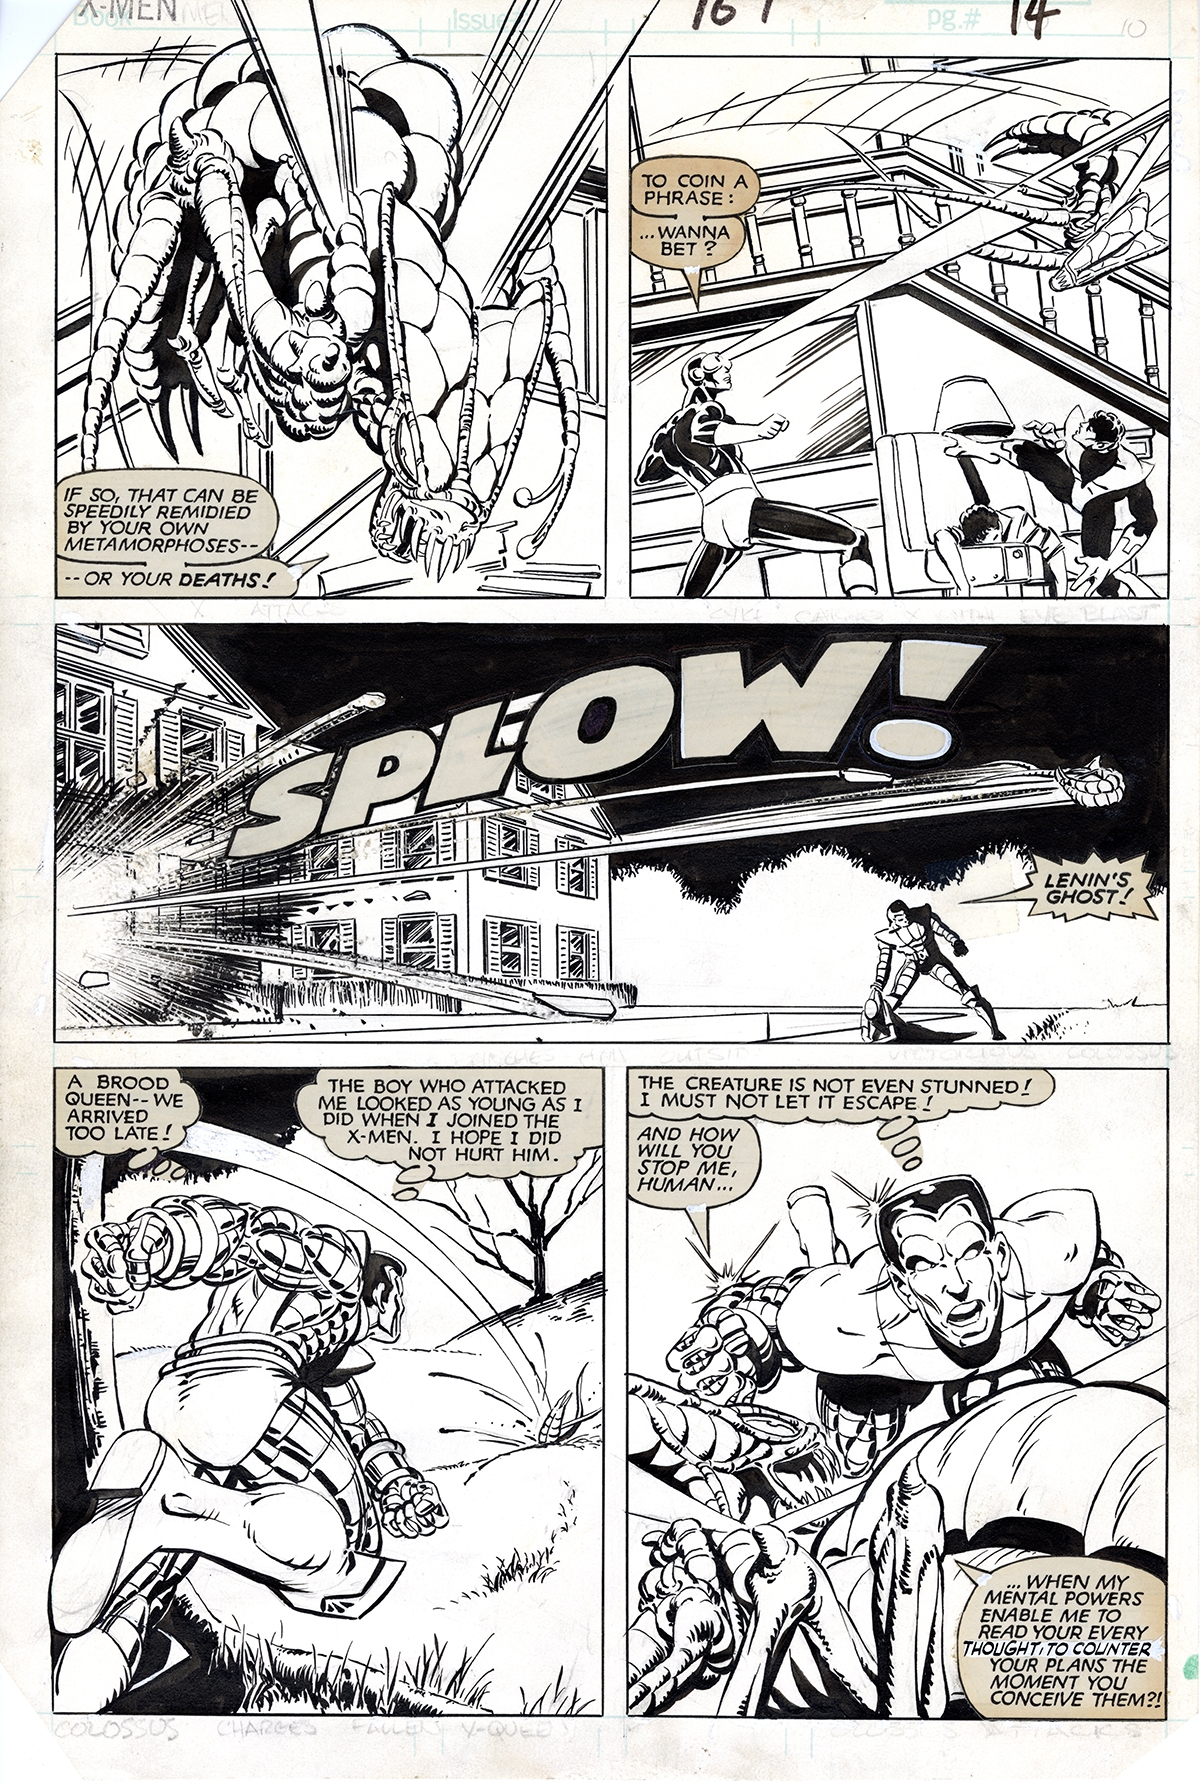 Uncanny X-Men #167 Page 14 by Paul Smith (Marvel 1983), in James Henry's  Paul Smith Comic Art Gallery Room